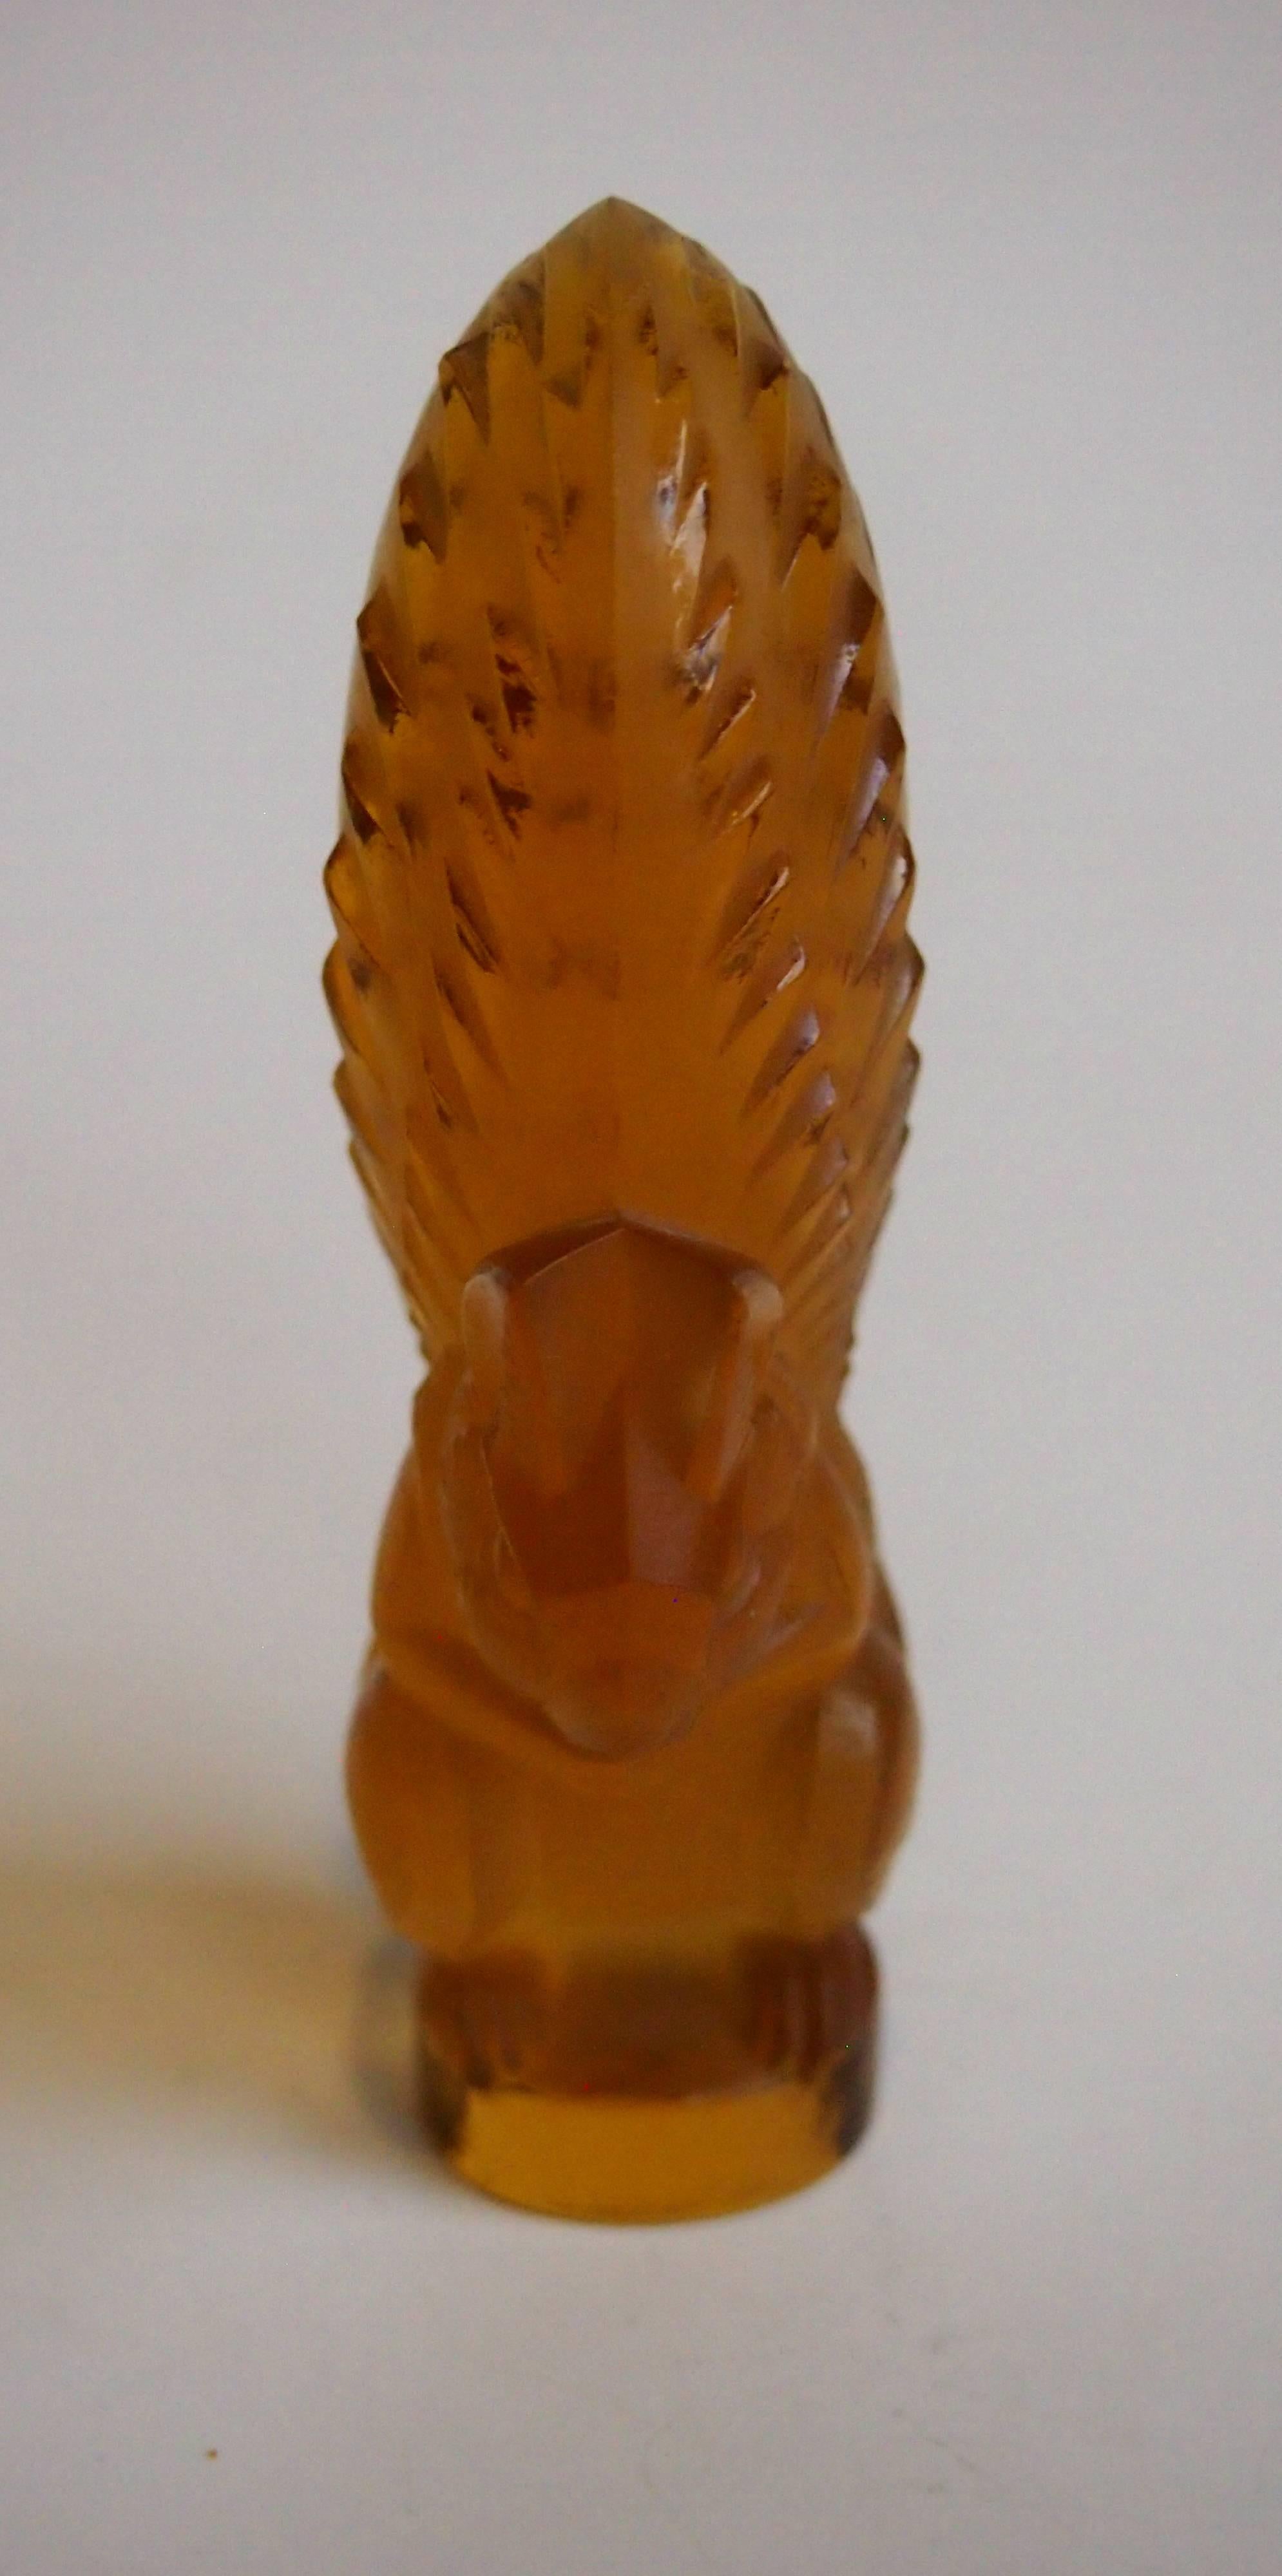 Rare and cute Art Deco Rene Lalique signed amber/yellow squirrel cachet (Ecureuil)- dating to 1931. (Ref: Marcilhac 227) Cachets were made so you could have your initials cut into the base and then use it to mark red wax seals for correspondence